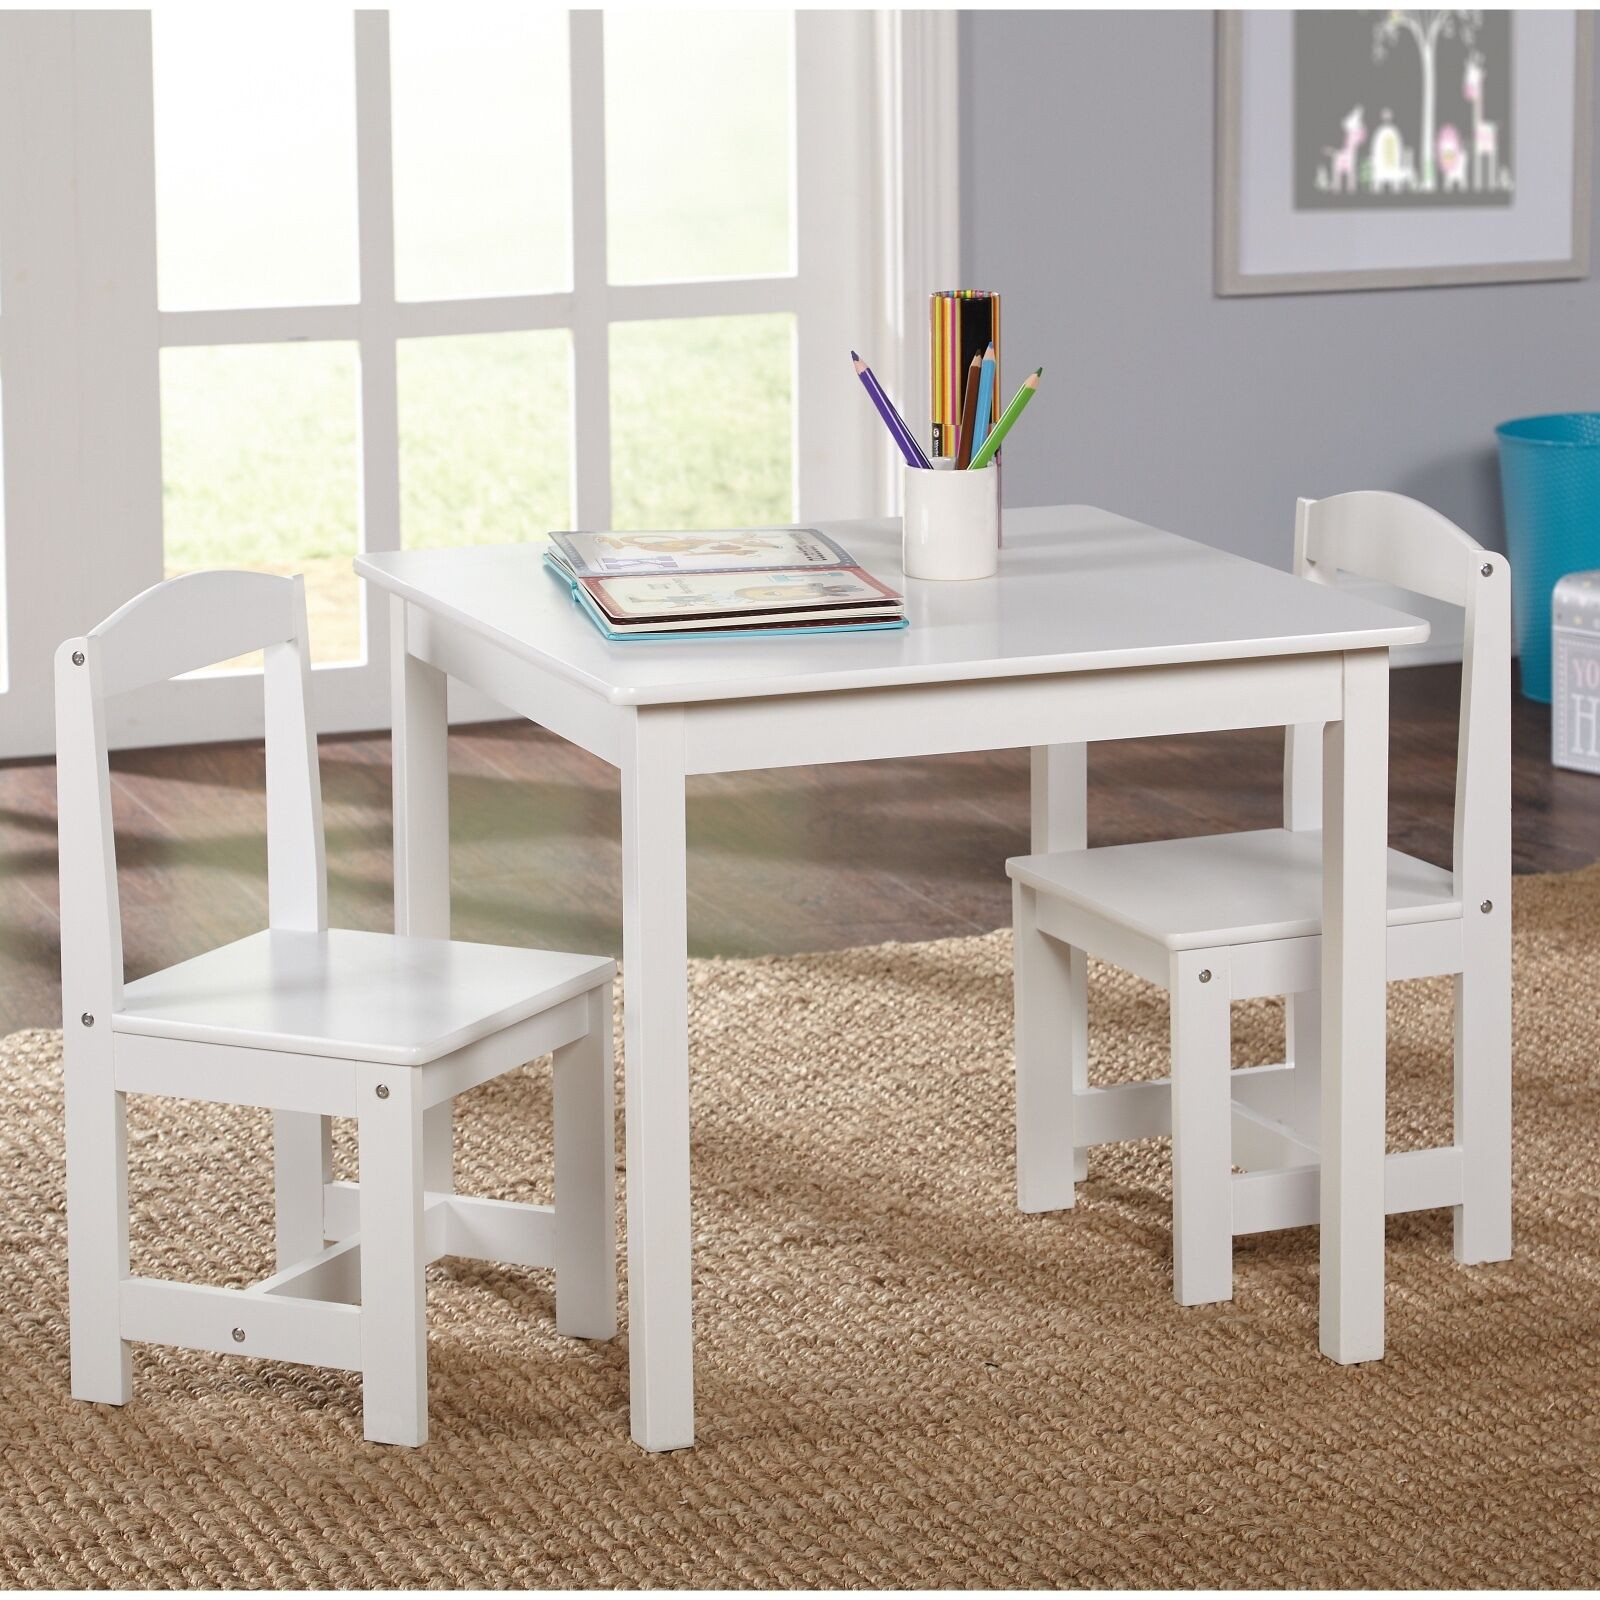 Kids Wooden Table Set
 Study Small Table and Chair Set Generic 3 Piece Wood